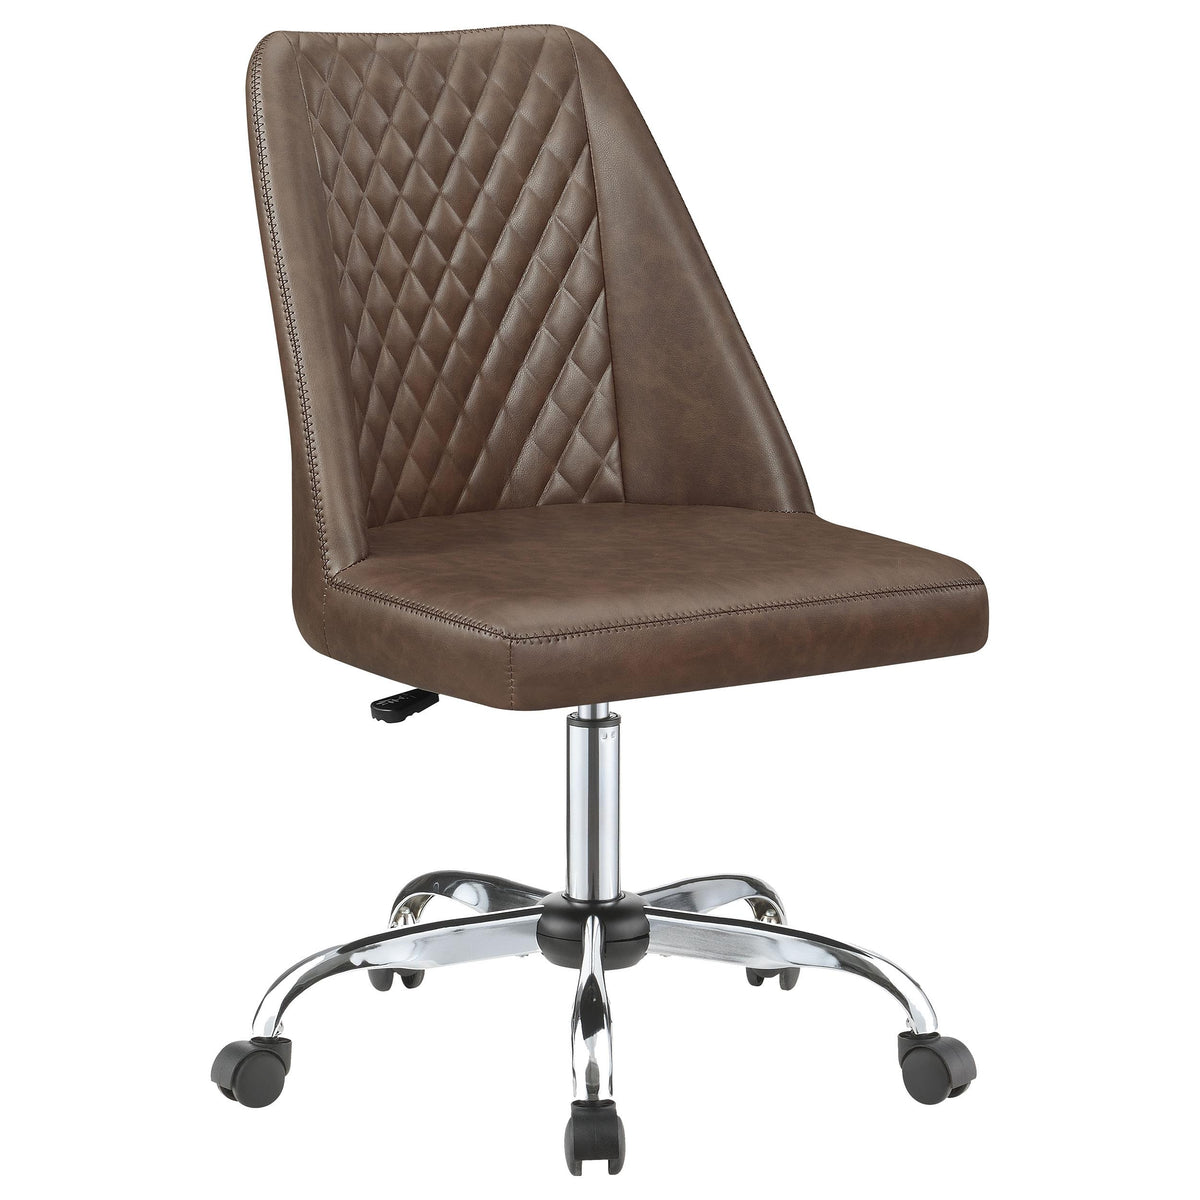 Althea Upholstered Tufted Back Office Chair Brown and Chrome  Las Vegas Furniture Stores